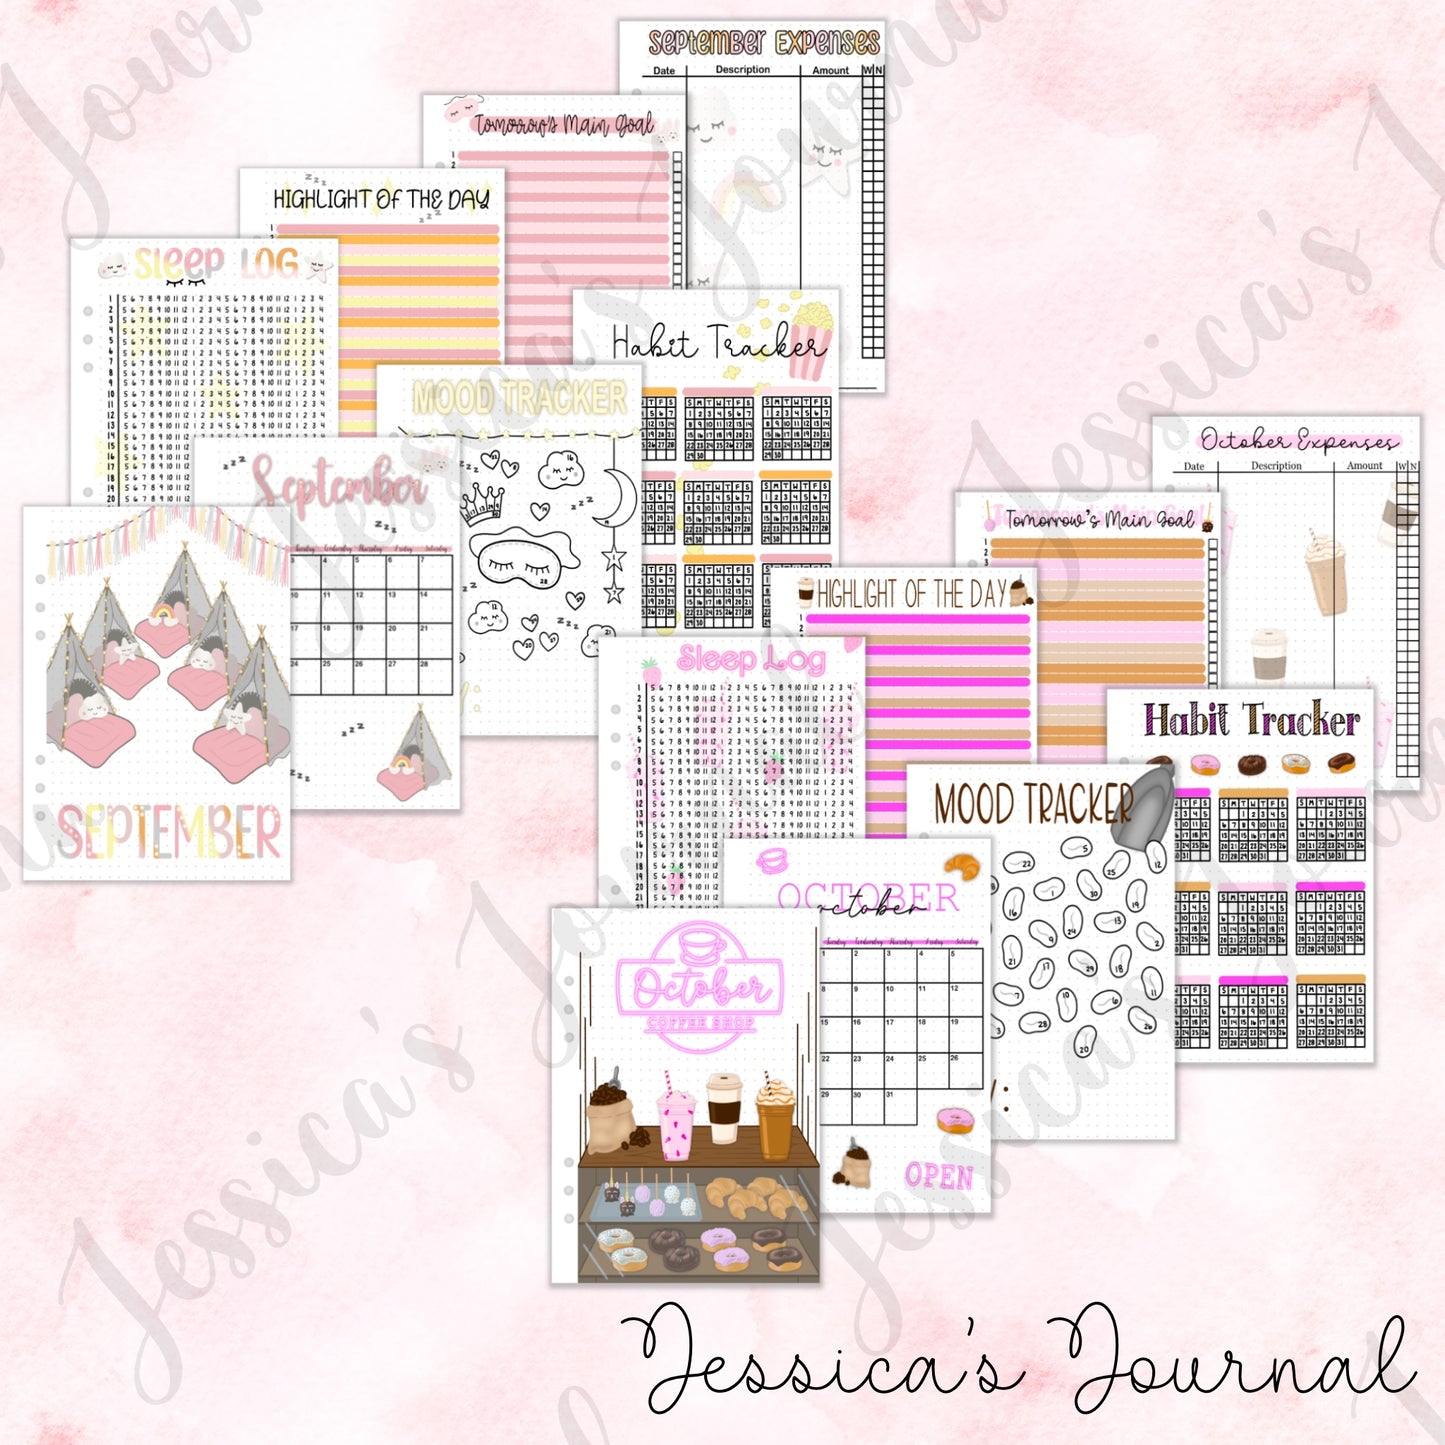 The Full Year Journal + Stationery Kit | Personalized Journal | 2024 Spreads | Stationery